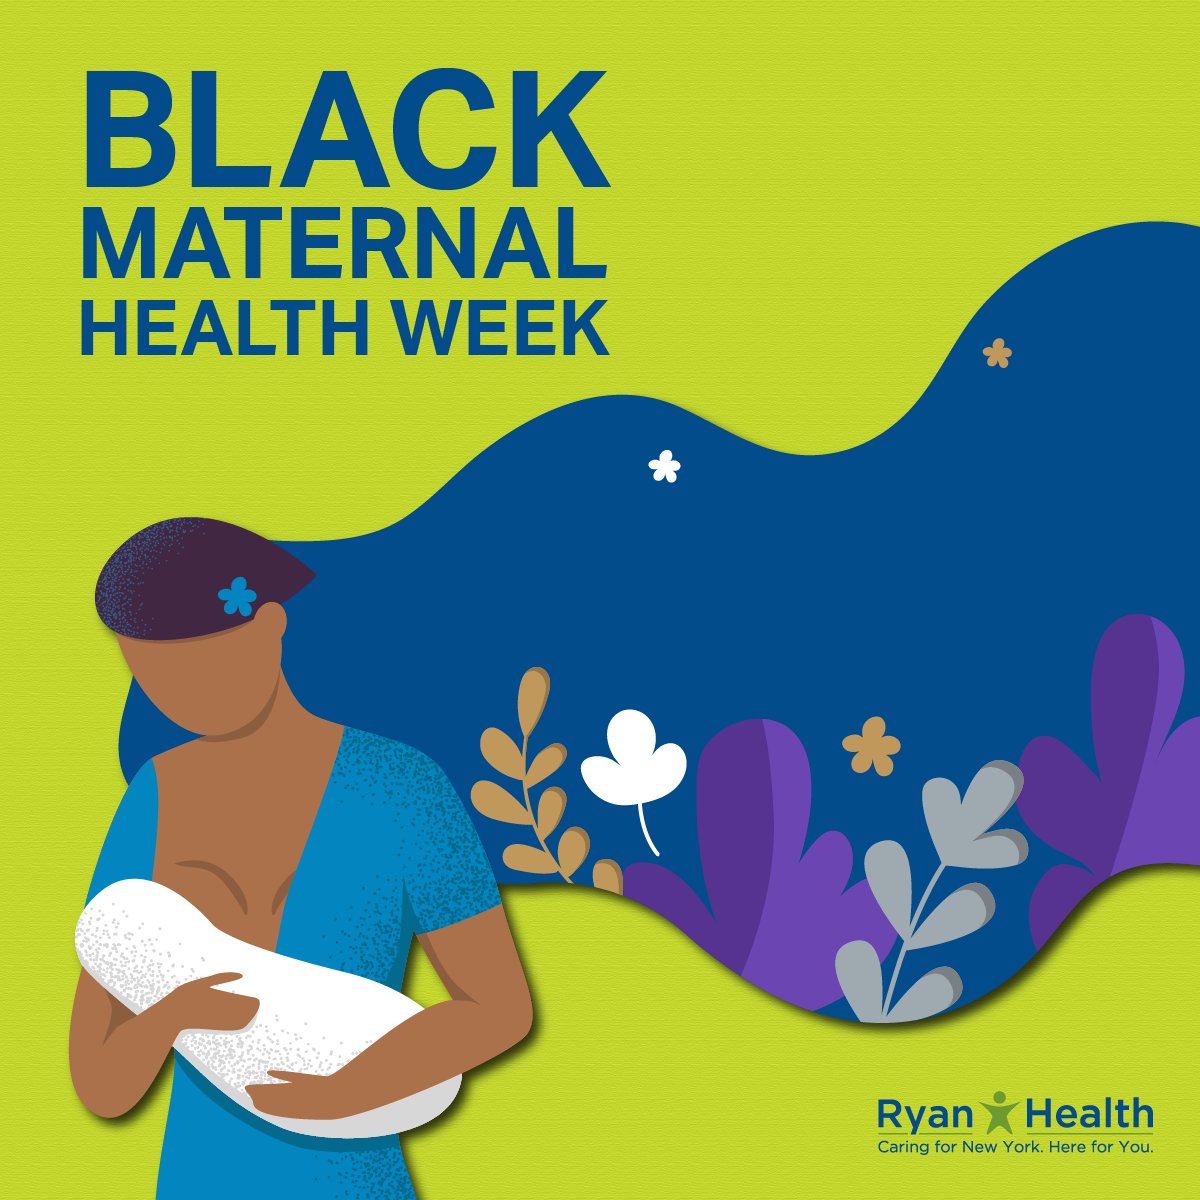 This week is #BlackMaternalHealthWeek. Ryan Health continues to work to ensure better outcomes for both moms and babies of color. We strive to provide care that helps moms throughout their pregnancies and once their little ones arrive to bring racial parity to reproductive care.